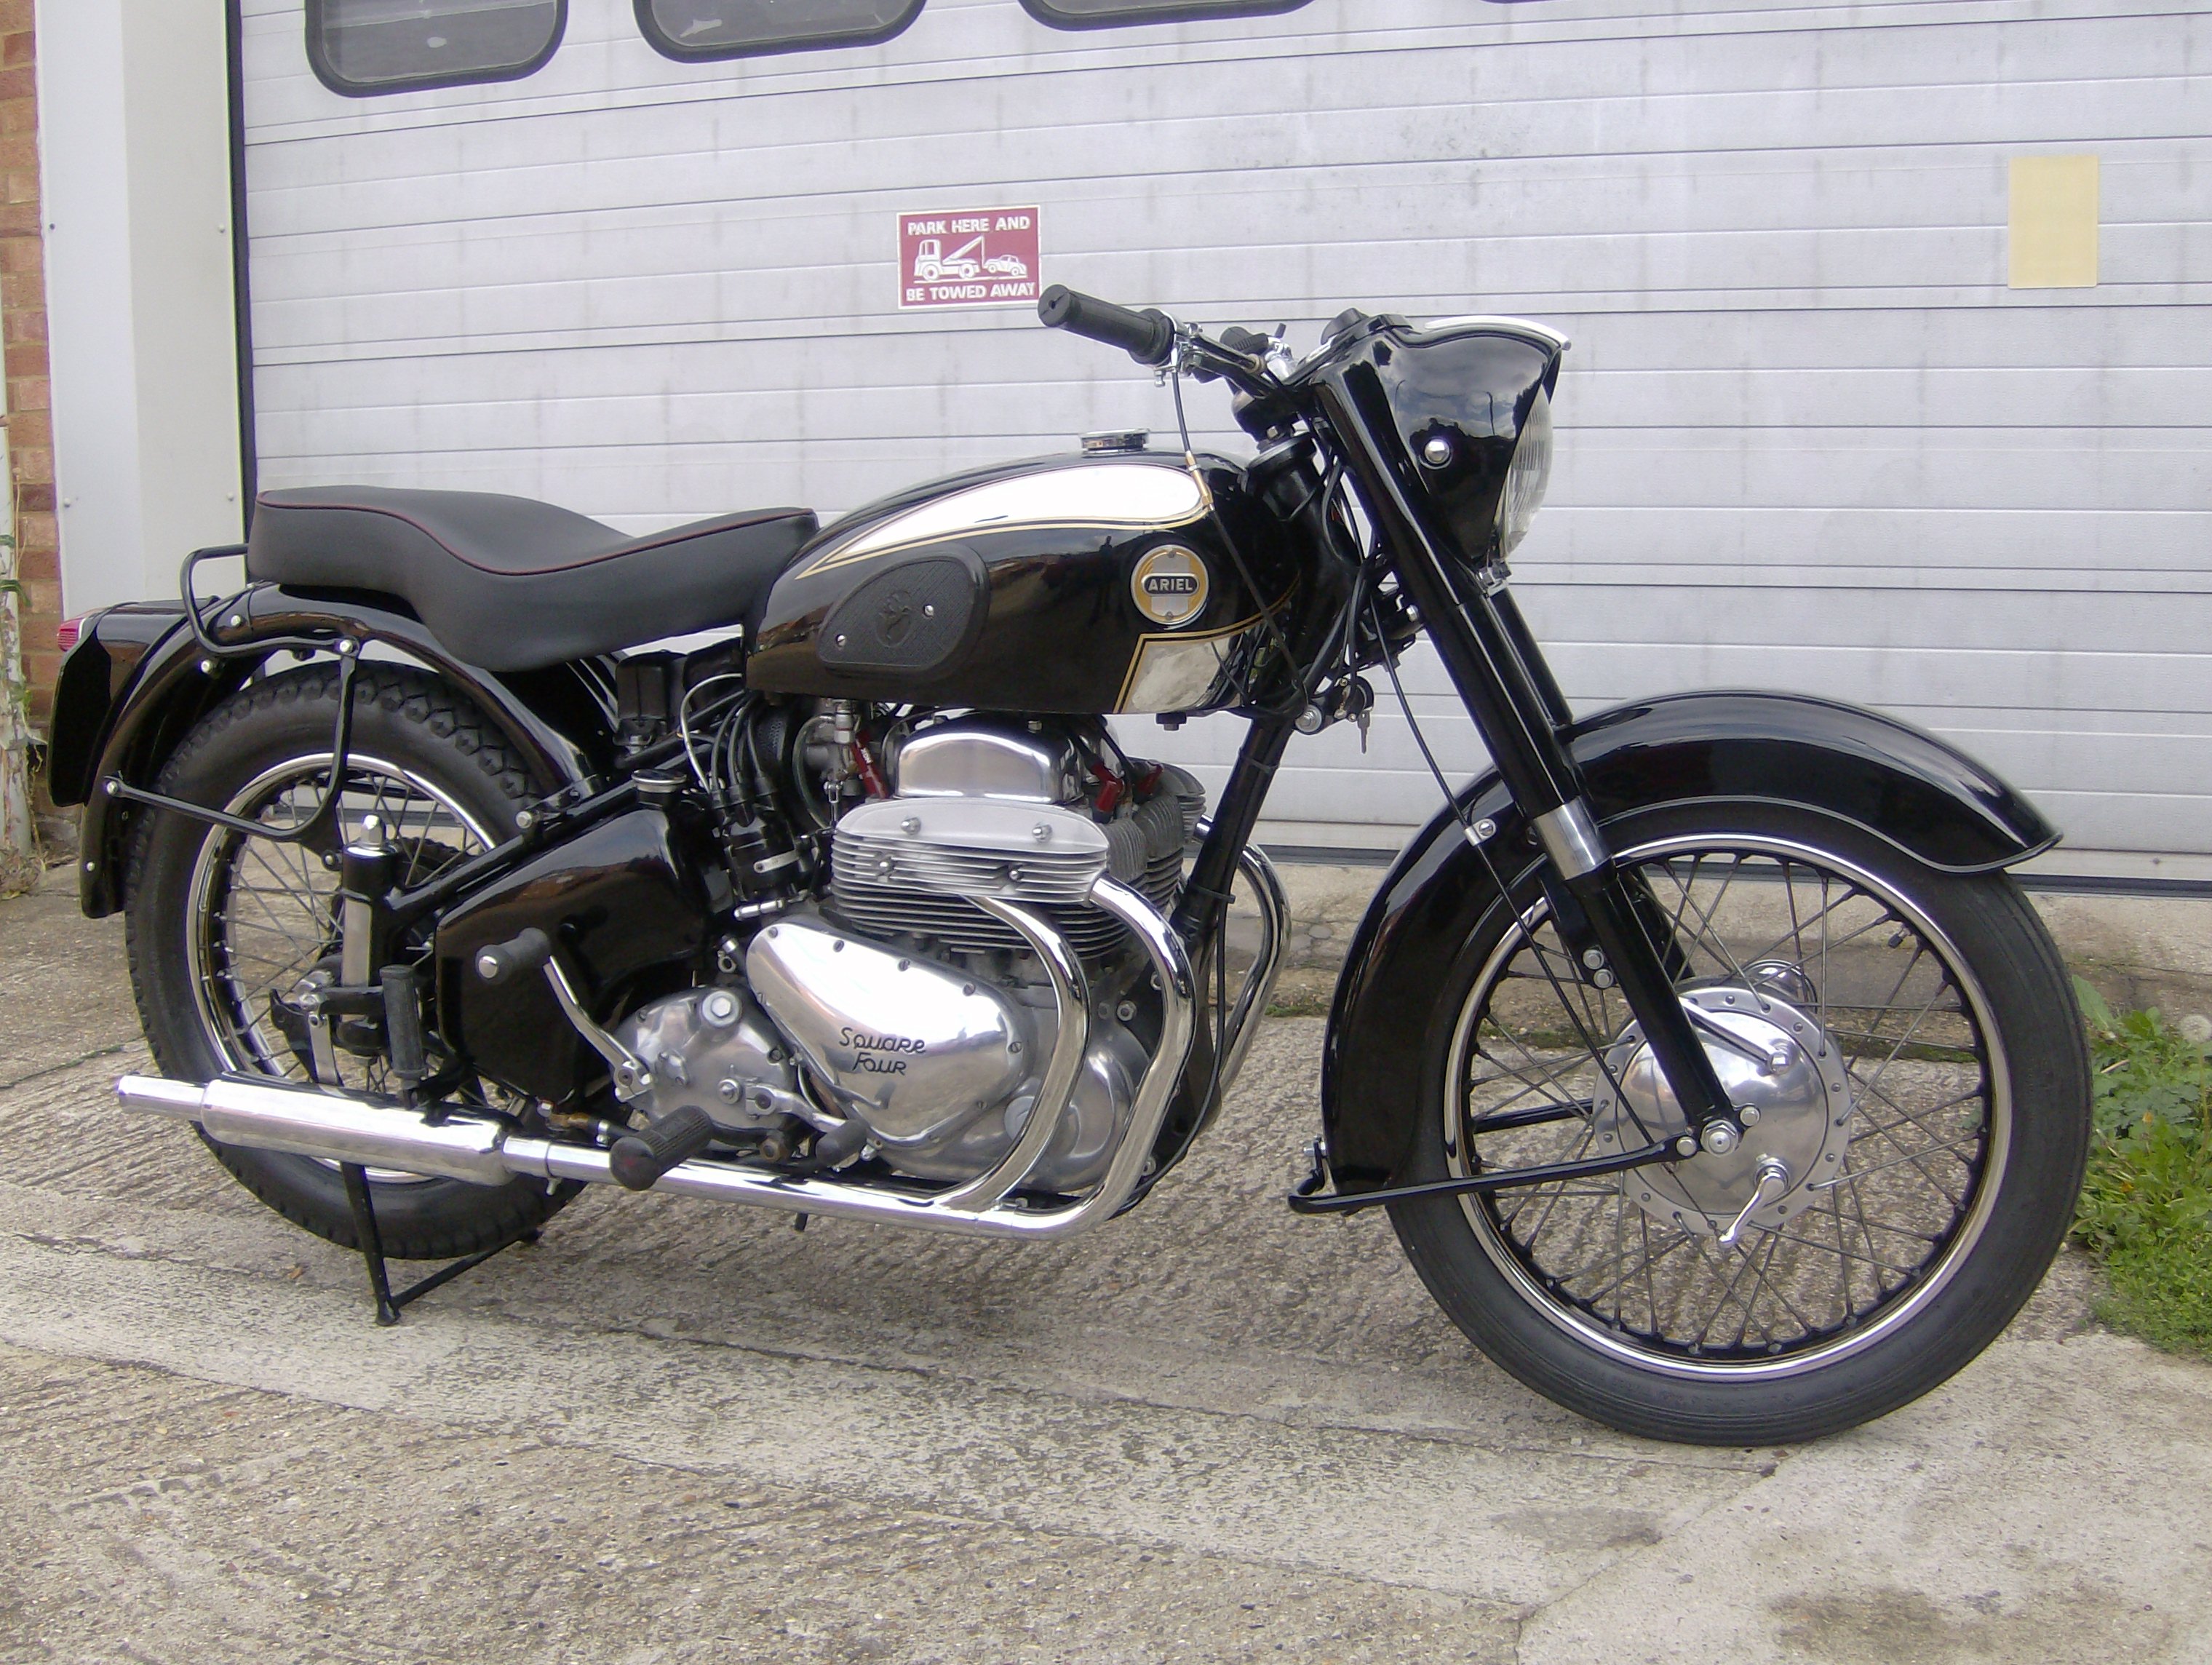 A real gentleman's motorcycle - a late Ariel Square 4 destined for Australia